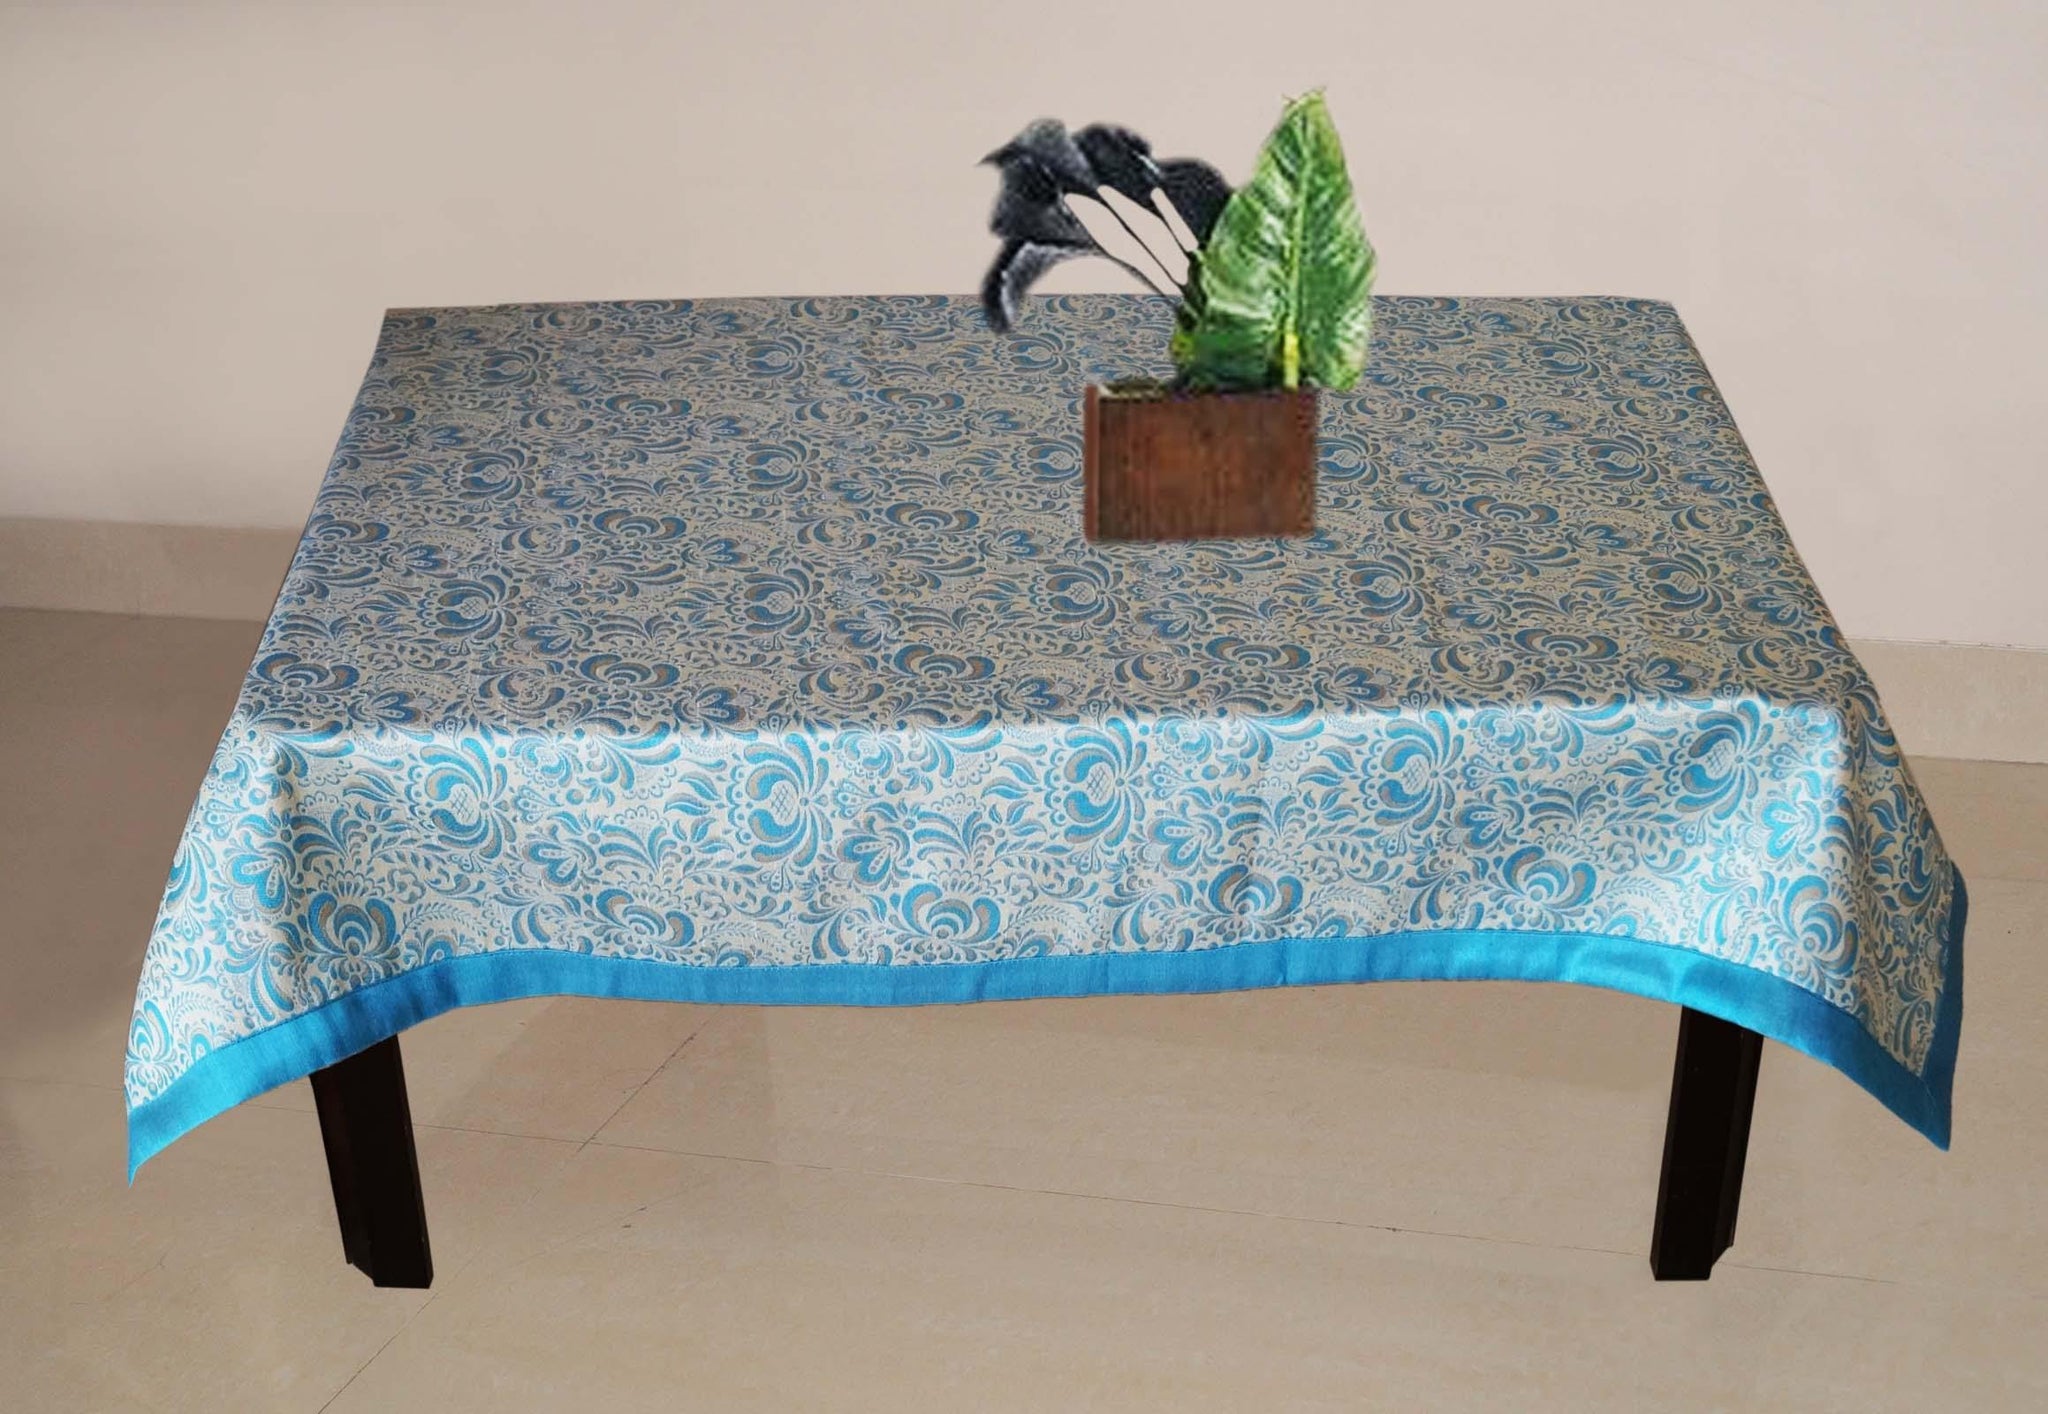 Lushomes Light Blue 1 Selfdesign Jaquard Centre Table Cloth (Size: 36x60 inches), single pc - Lushomes